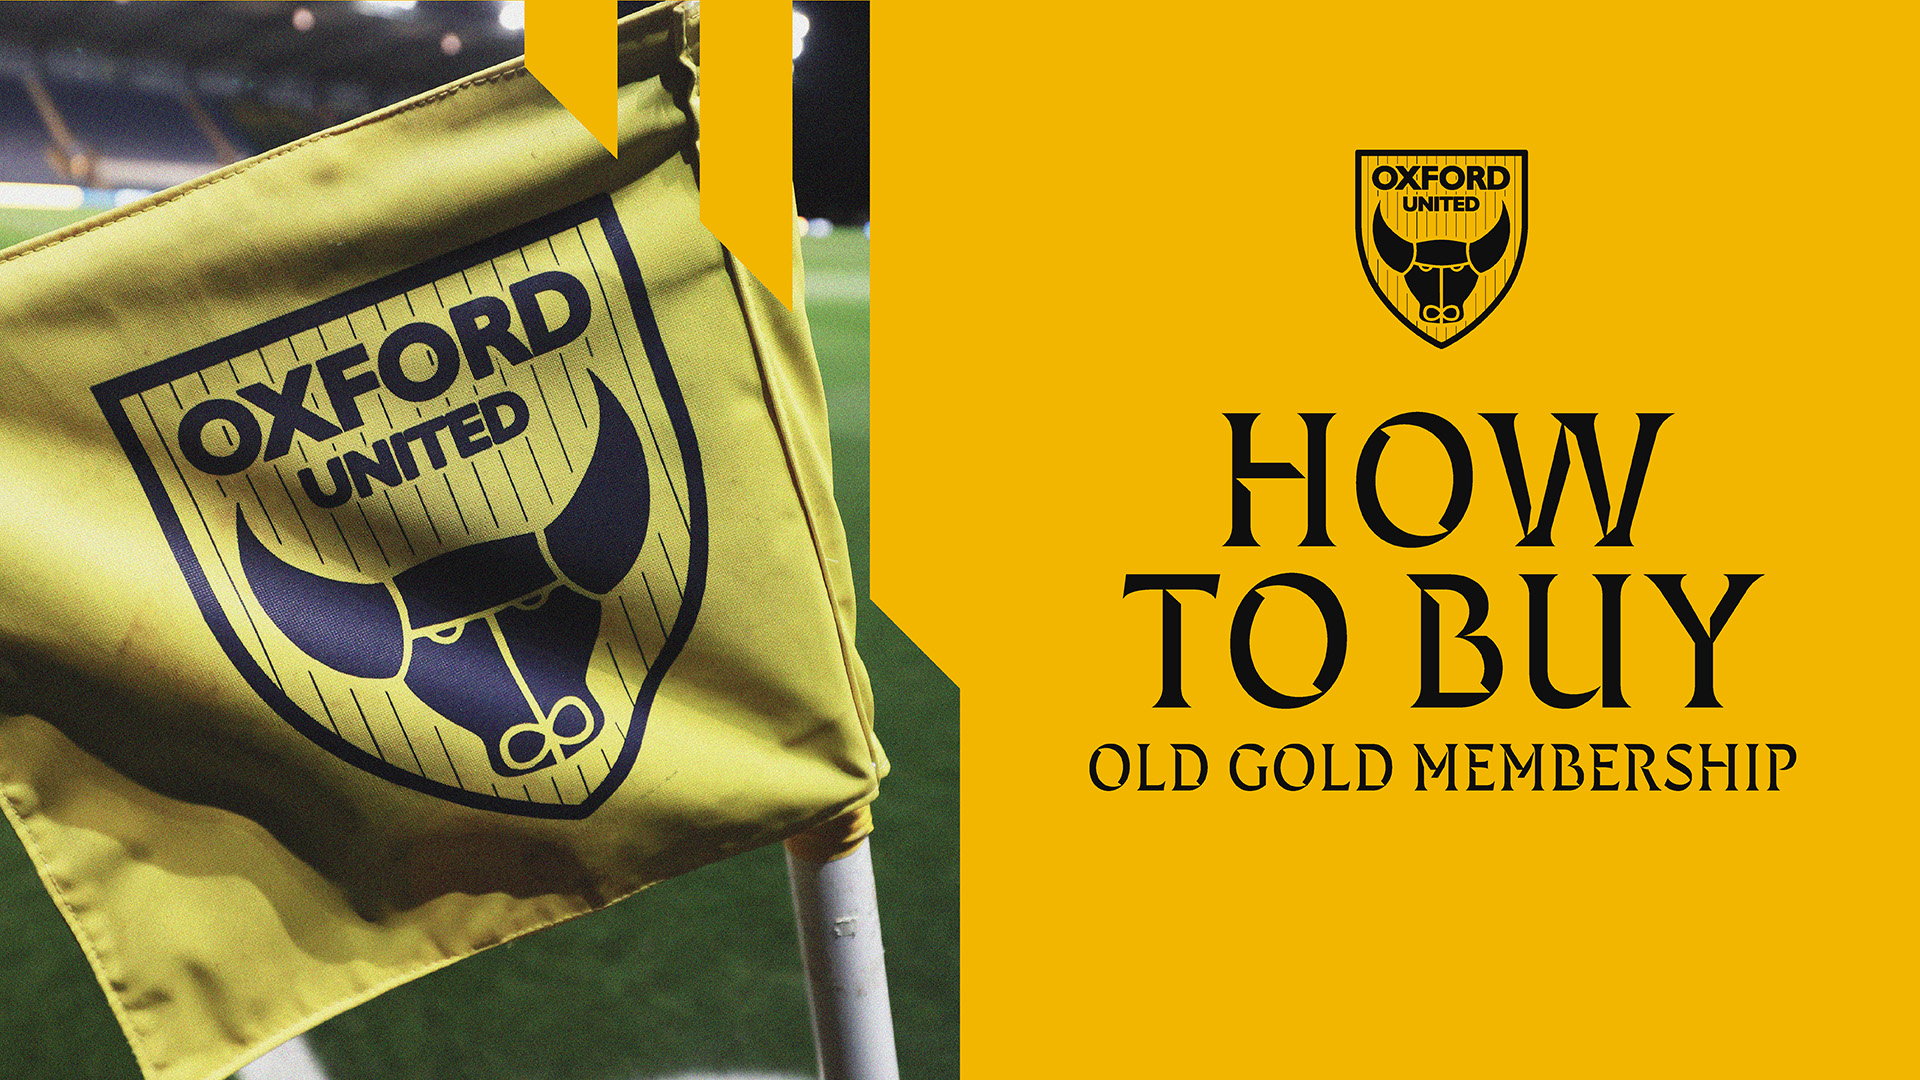 Old Gold Membership How To Buy